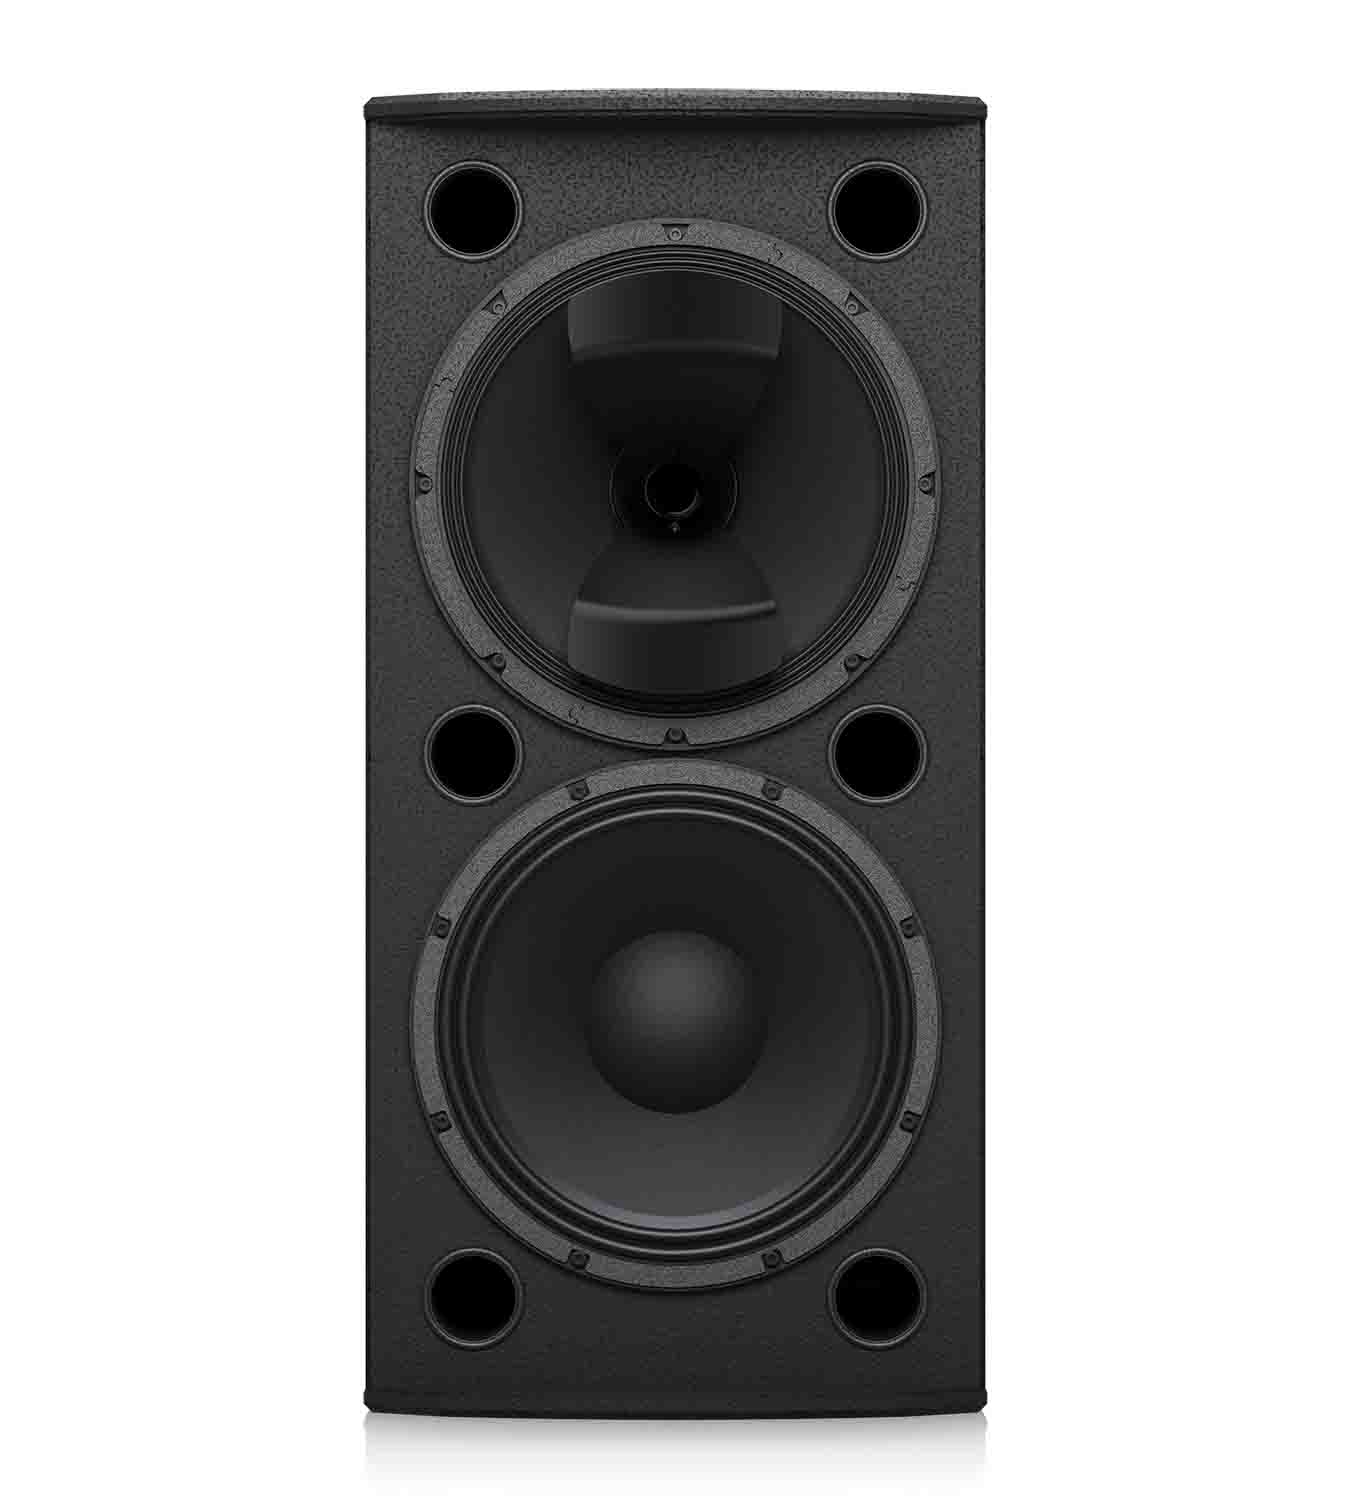 Tannoy VX 12.2Q, 12-Inch Power Dual Full Range Loudspeaker with Low-Frequency Driver and Q-Centric Waveguide - Hollywood DJ